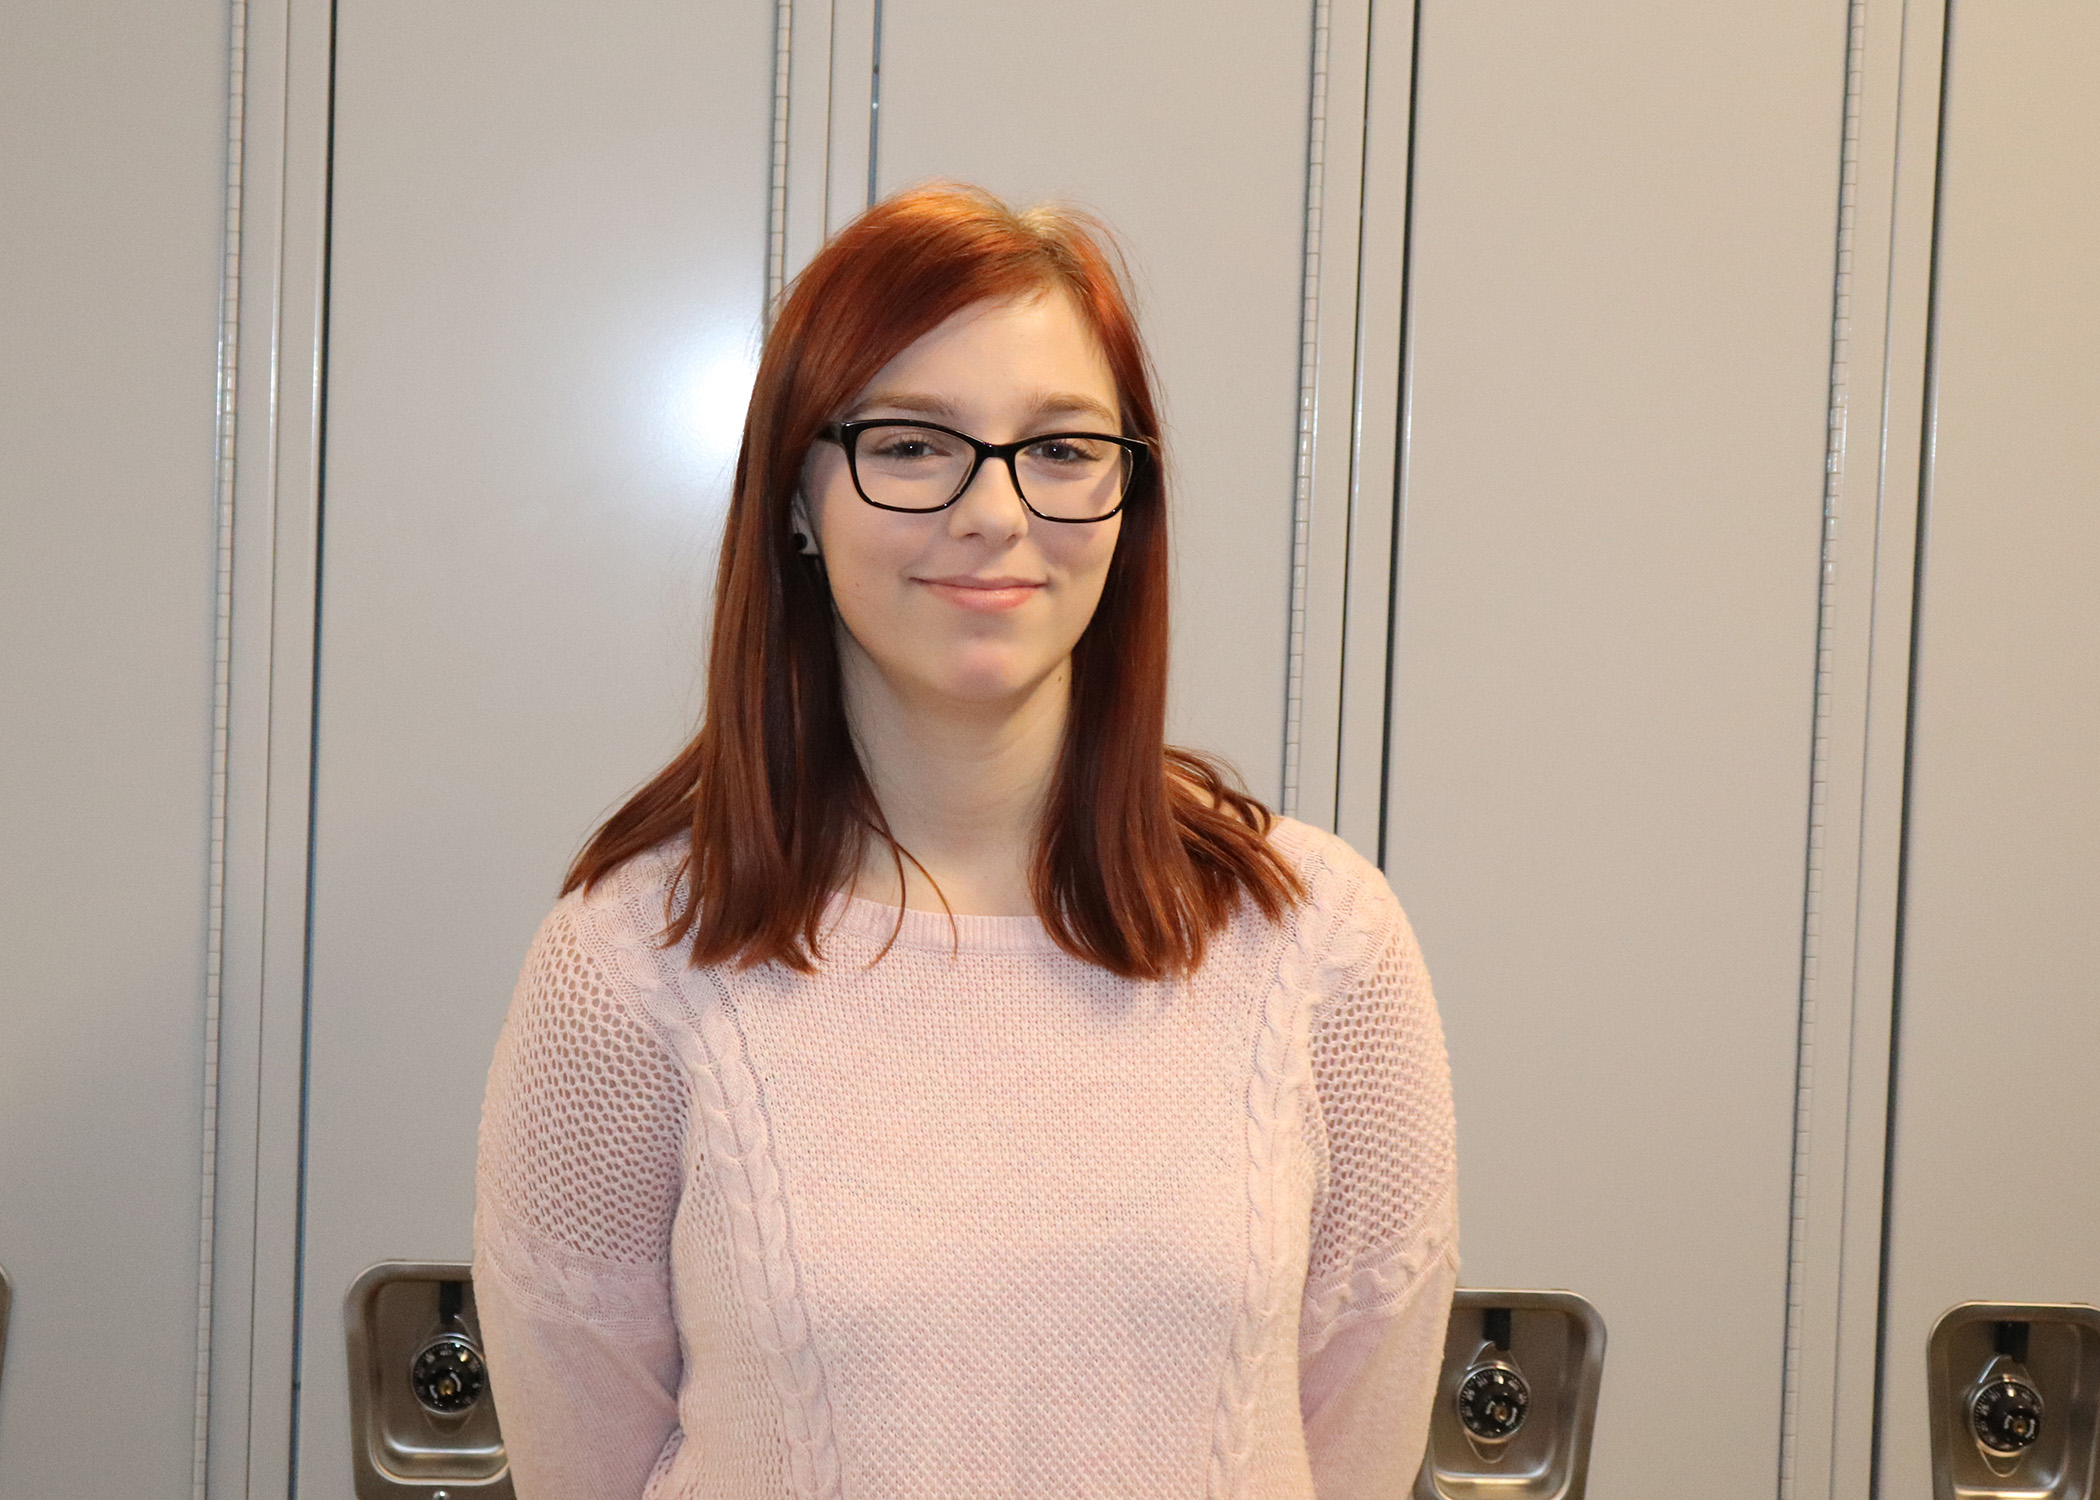 Capital Region BOCES Student Nominated as Presidential Scholar